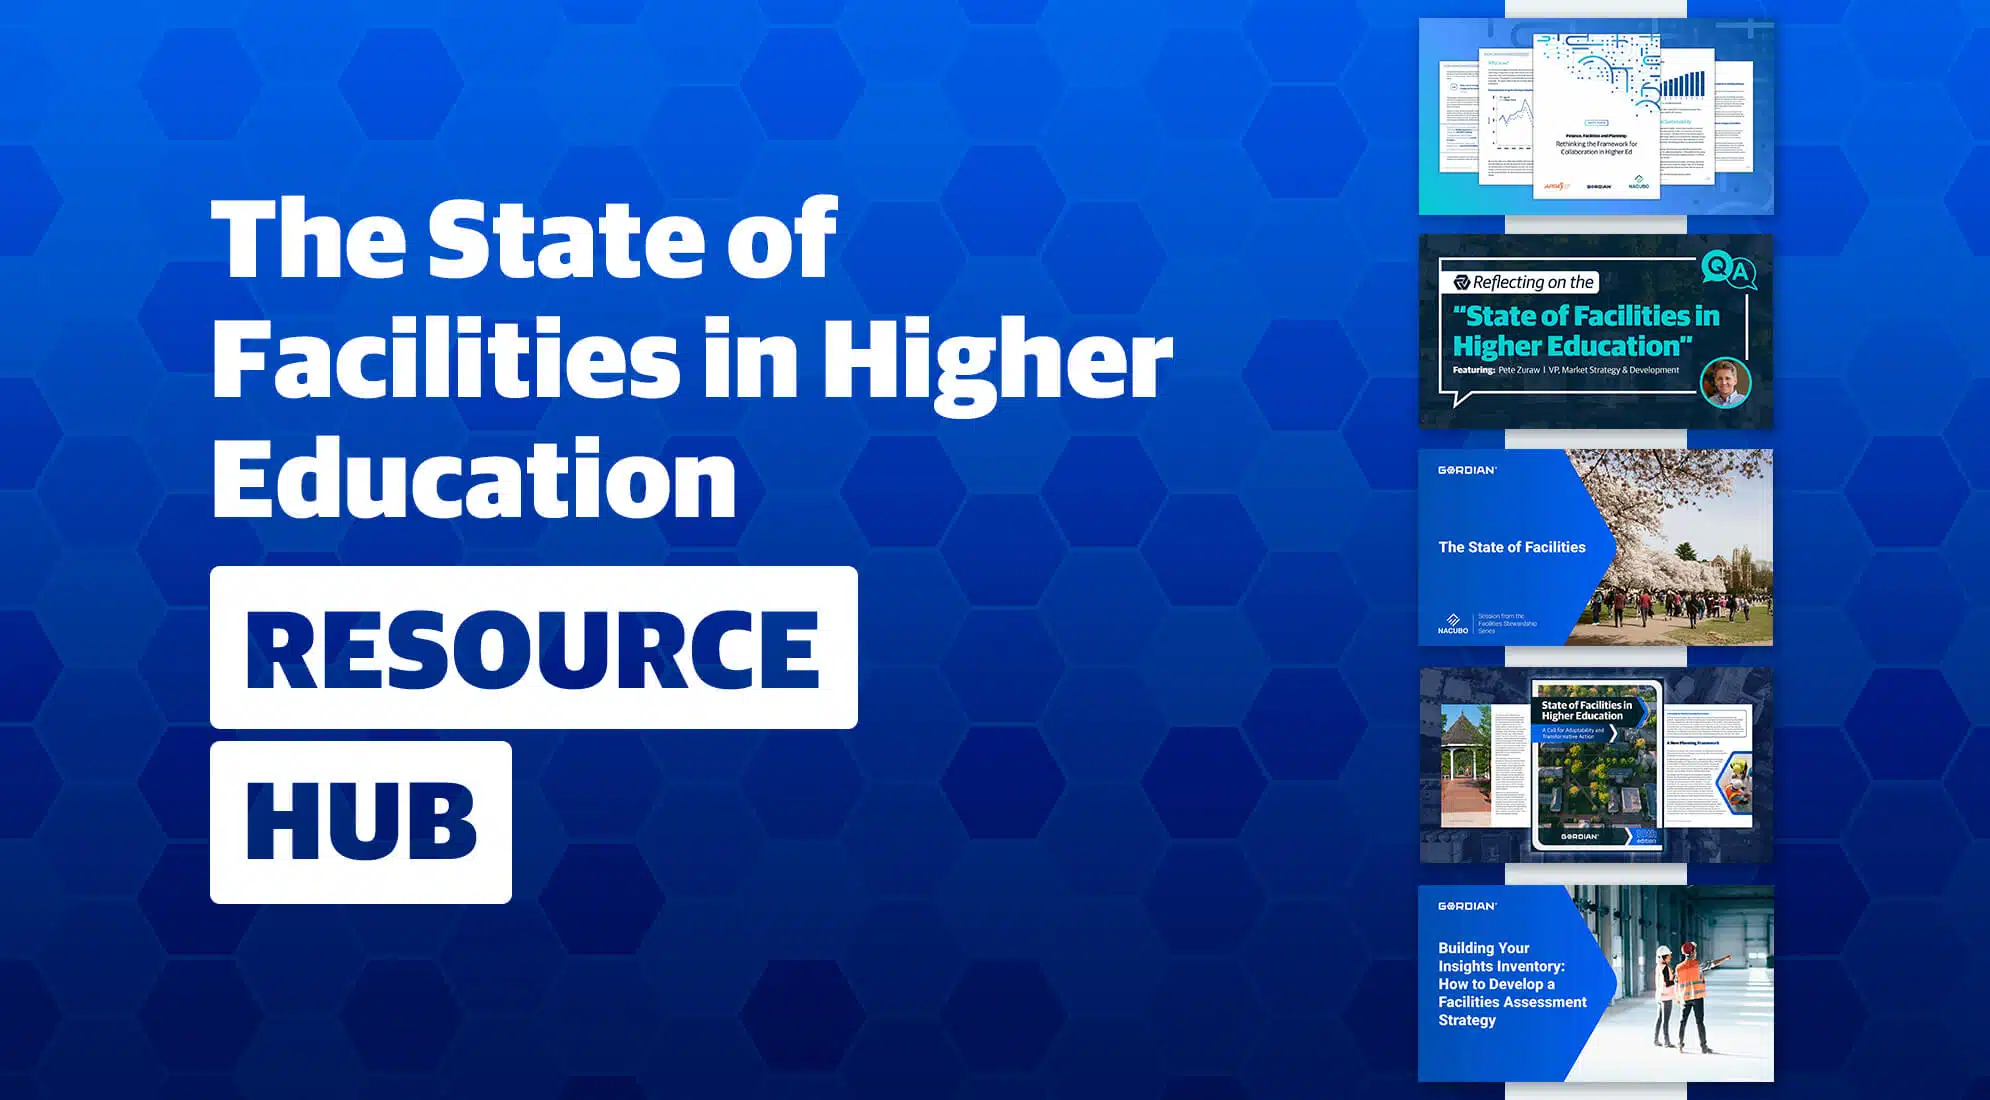 The State of Facilities in Higher Education Resource Hub 4